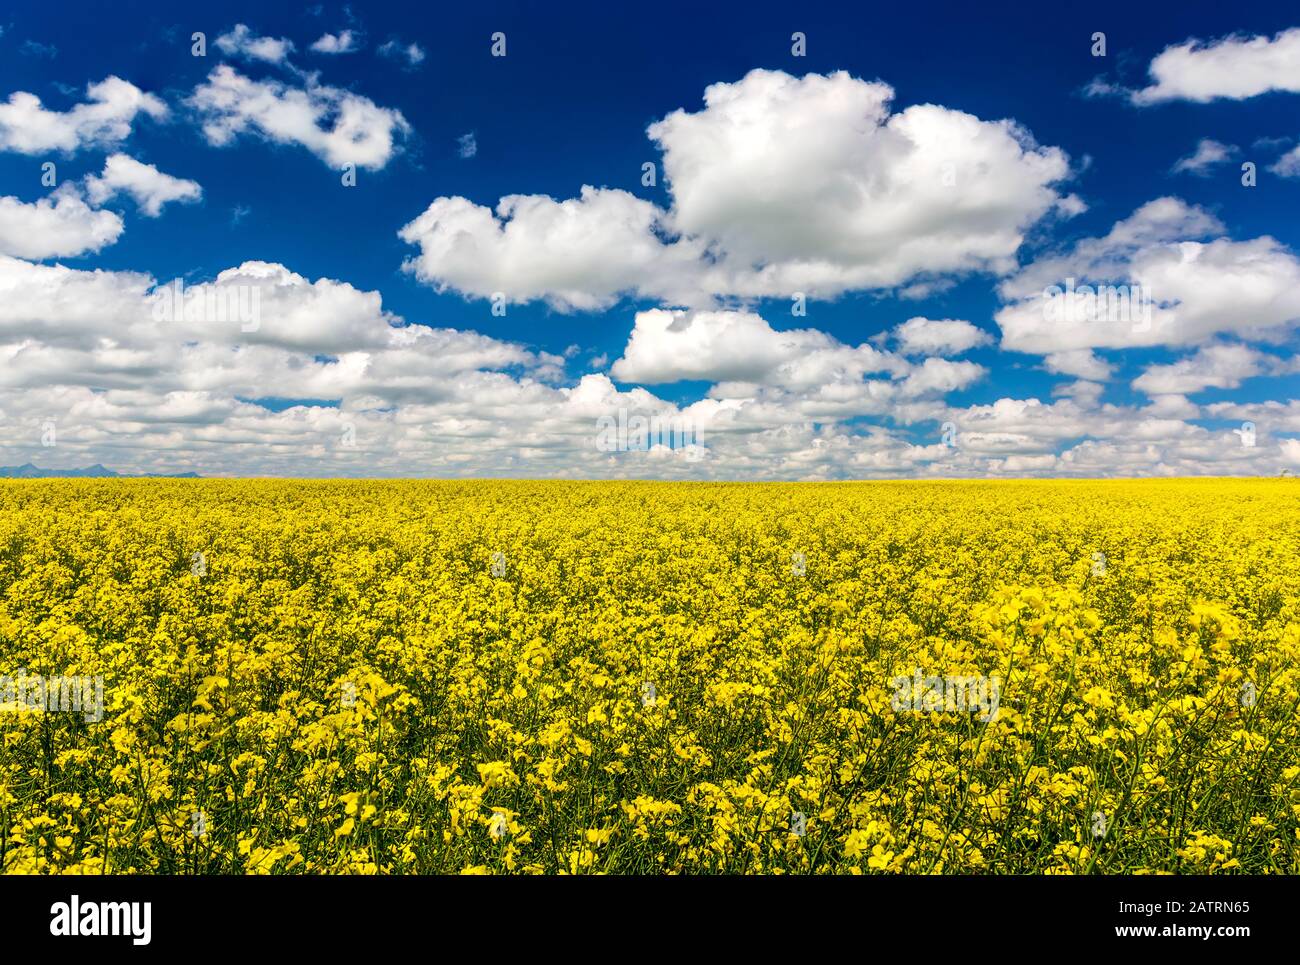 Flowering canola field with fluffy white clouds and blue sky, East of Calgary; Alberta, Canada Stock Photo